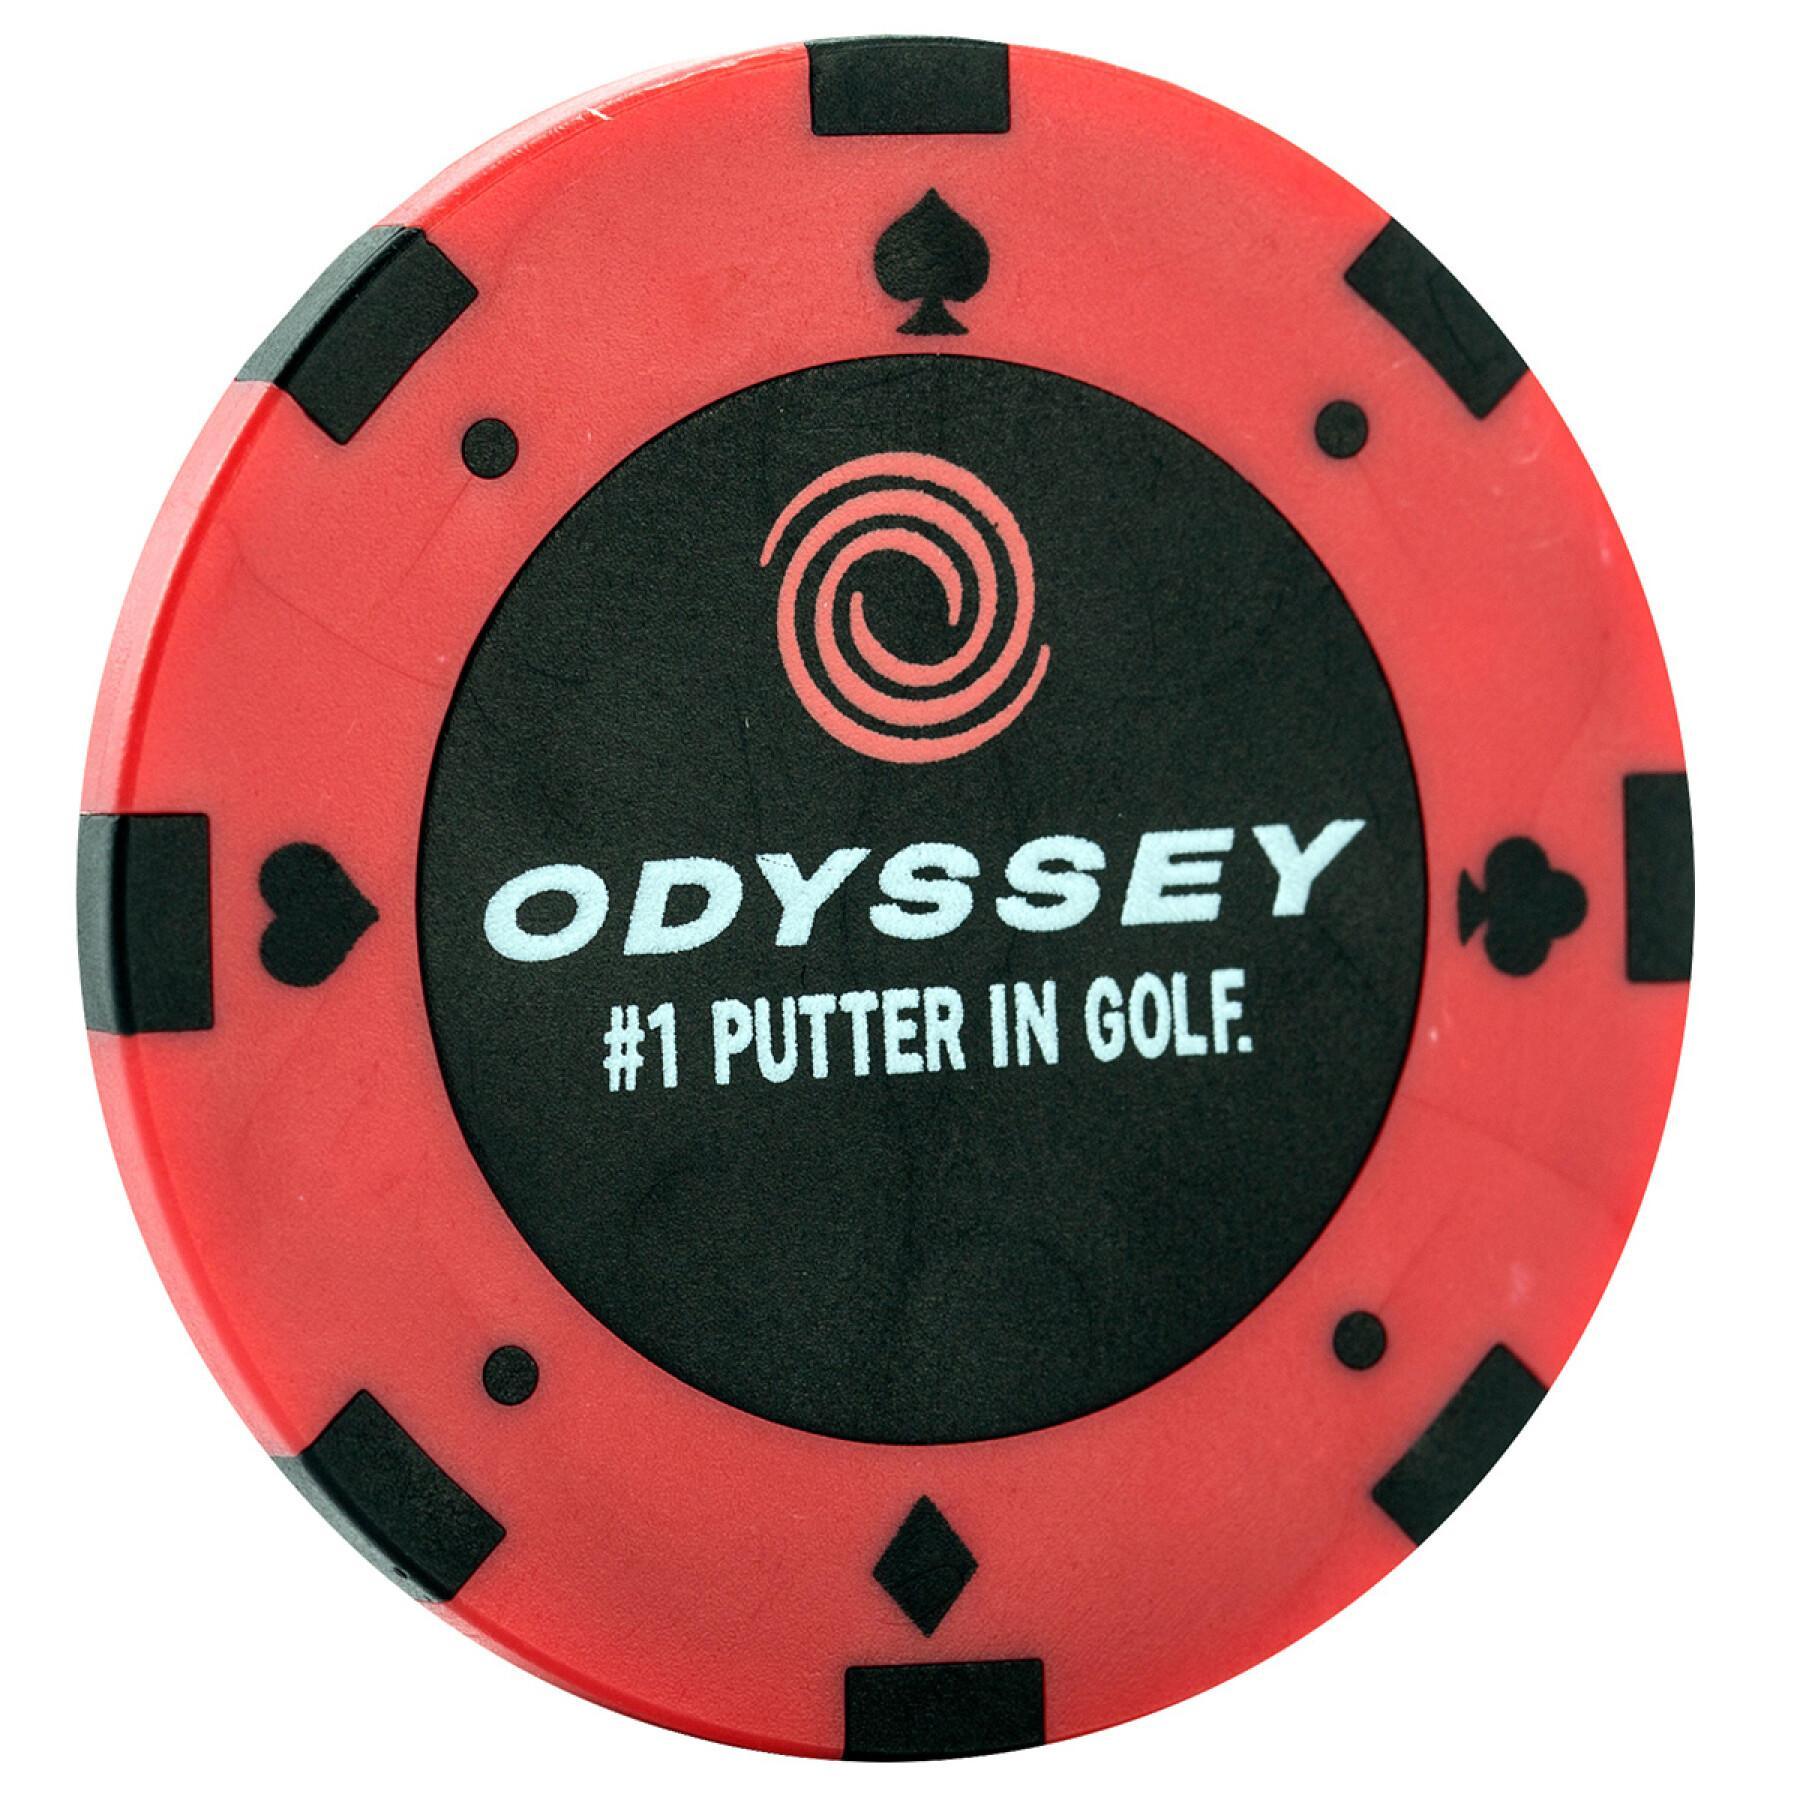 Golfbal markers Callaway odyssey poker chip